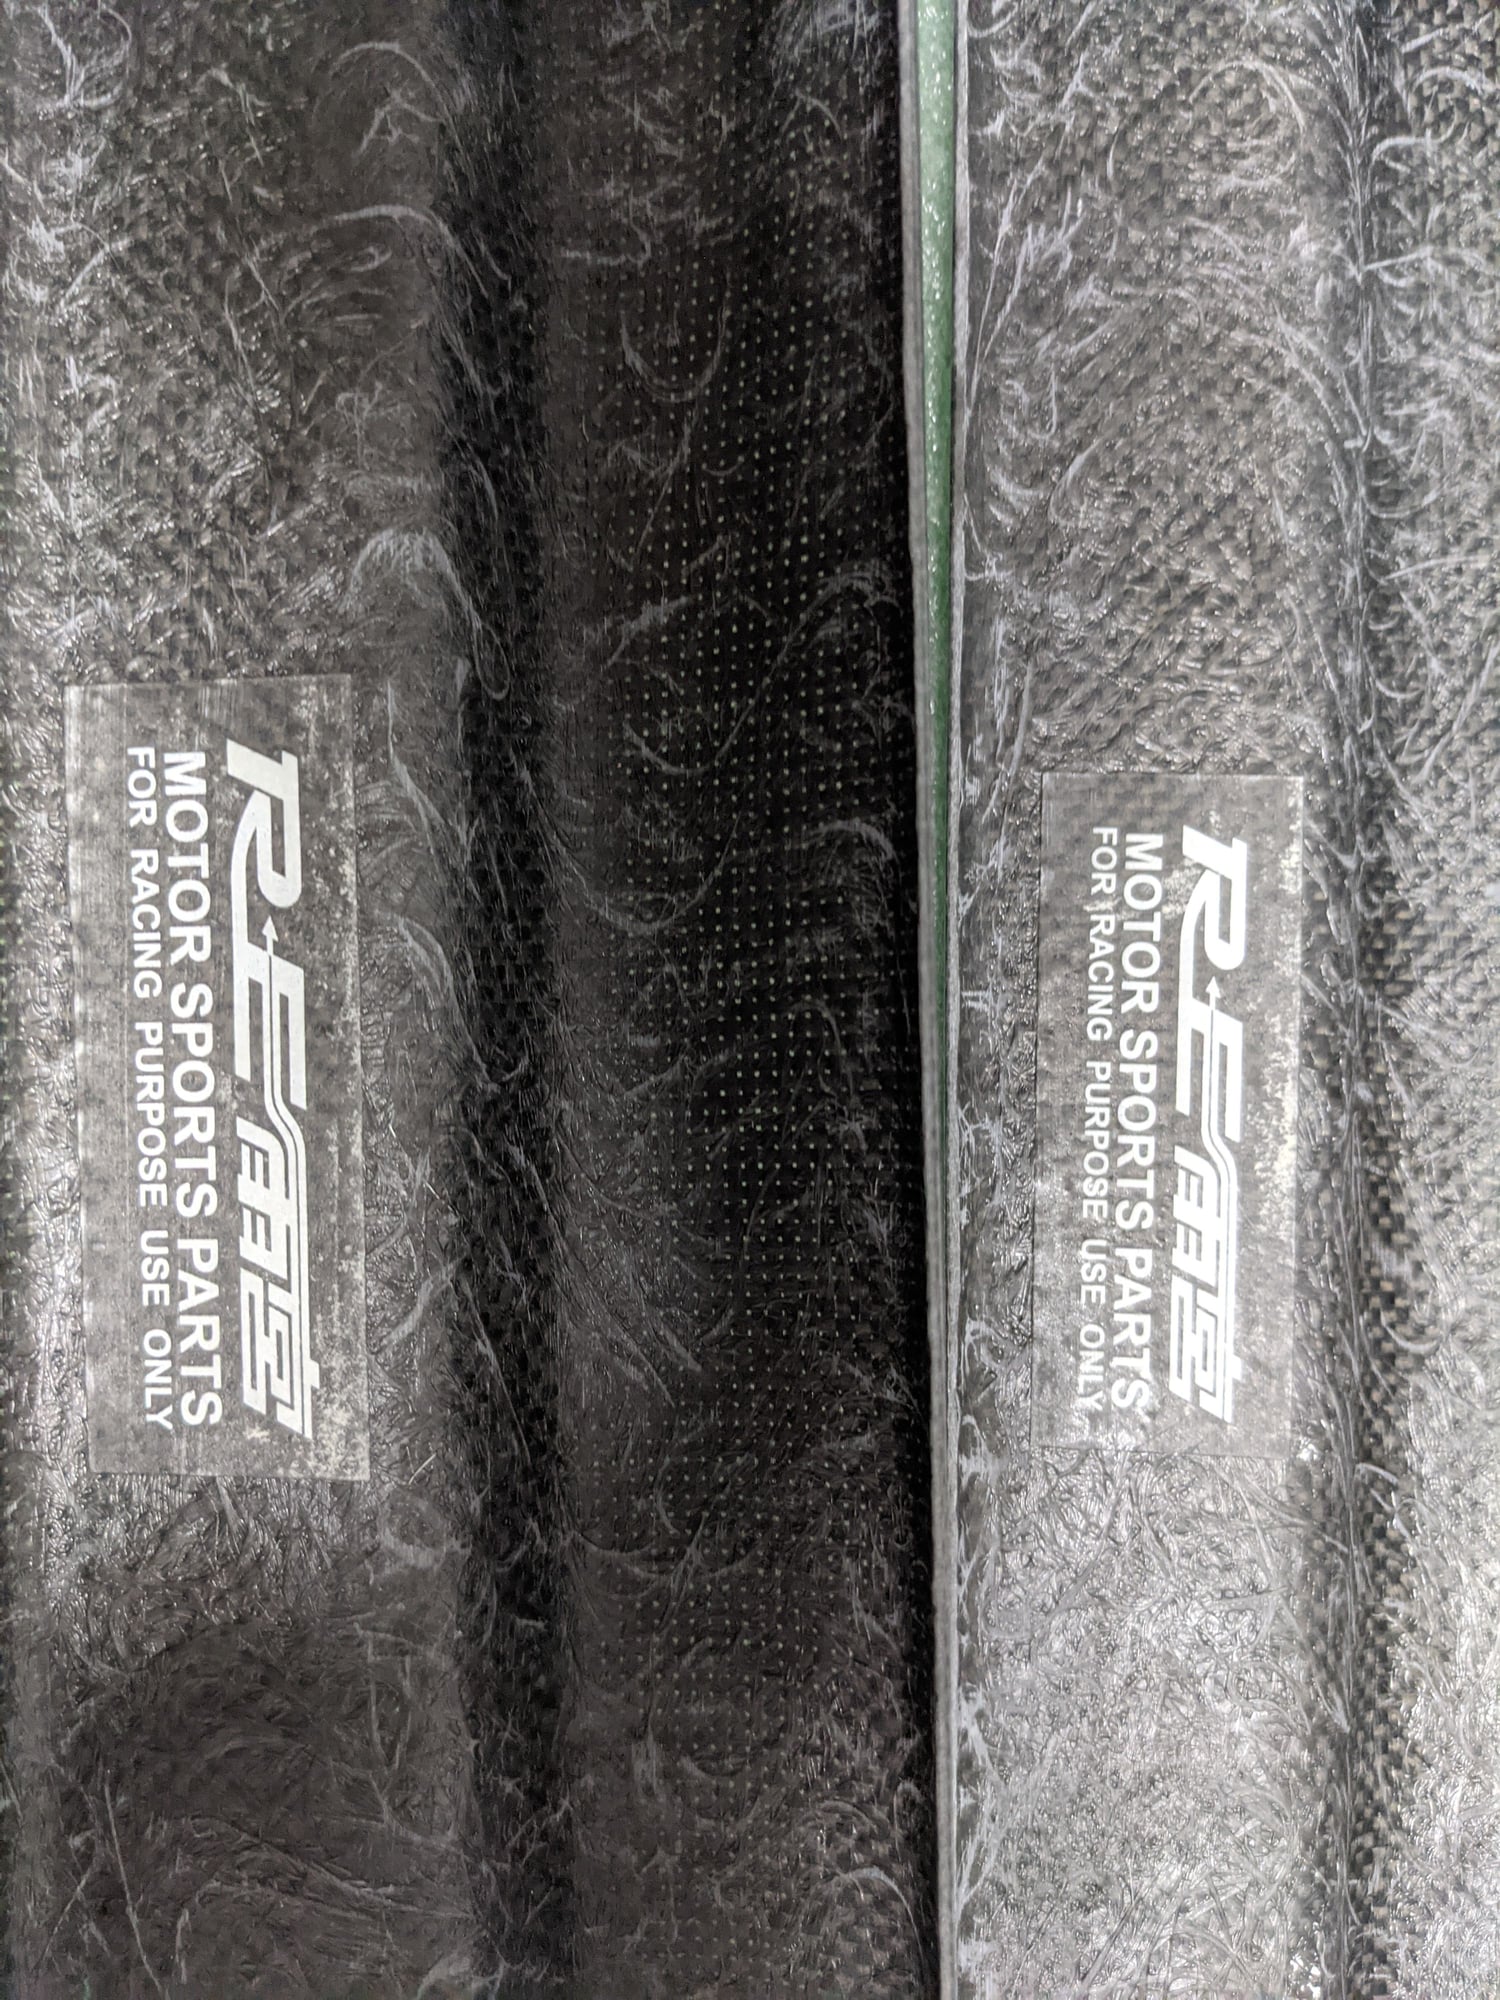 Interior/Upholstery - Re-amemiya wet carbon scuff plates - fd3s - New - 1992 to 2002 Mazda RX-7 - Chandler, AZ 85249, United States